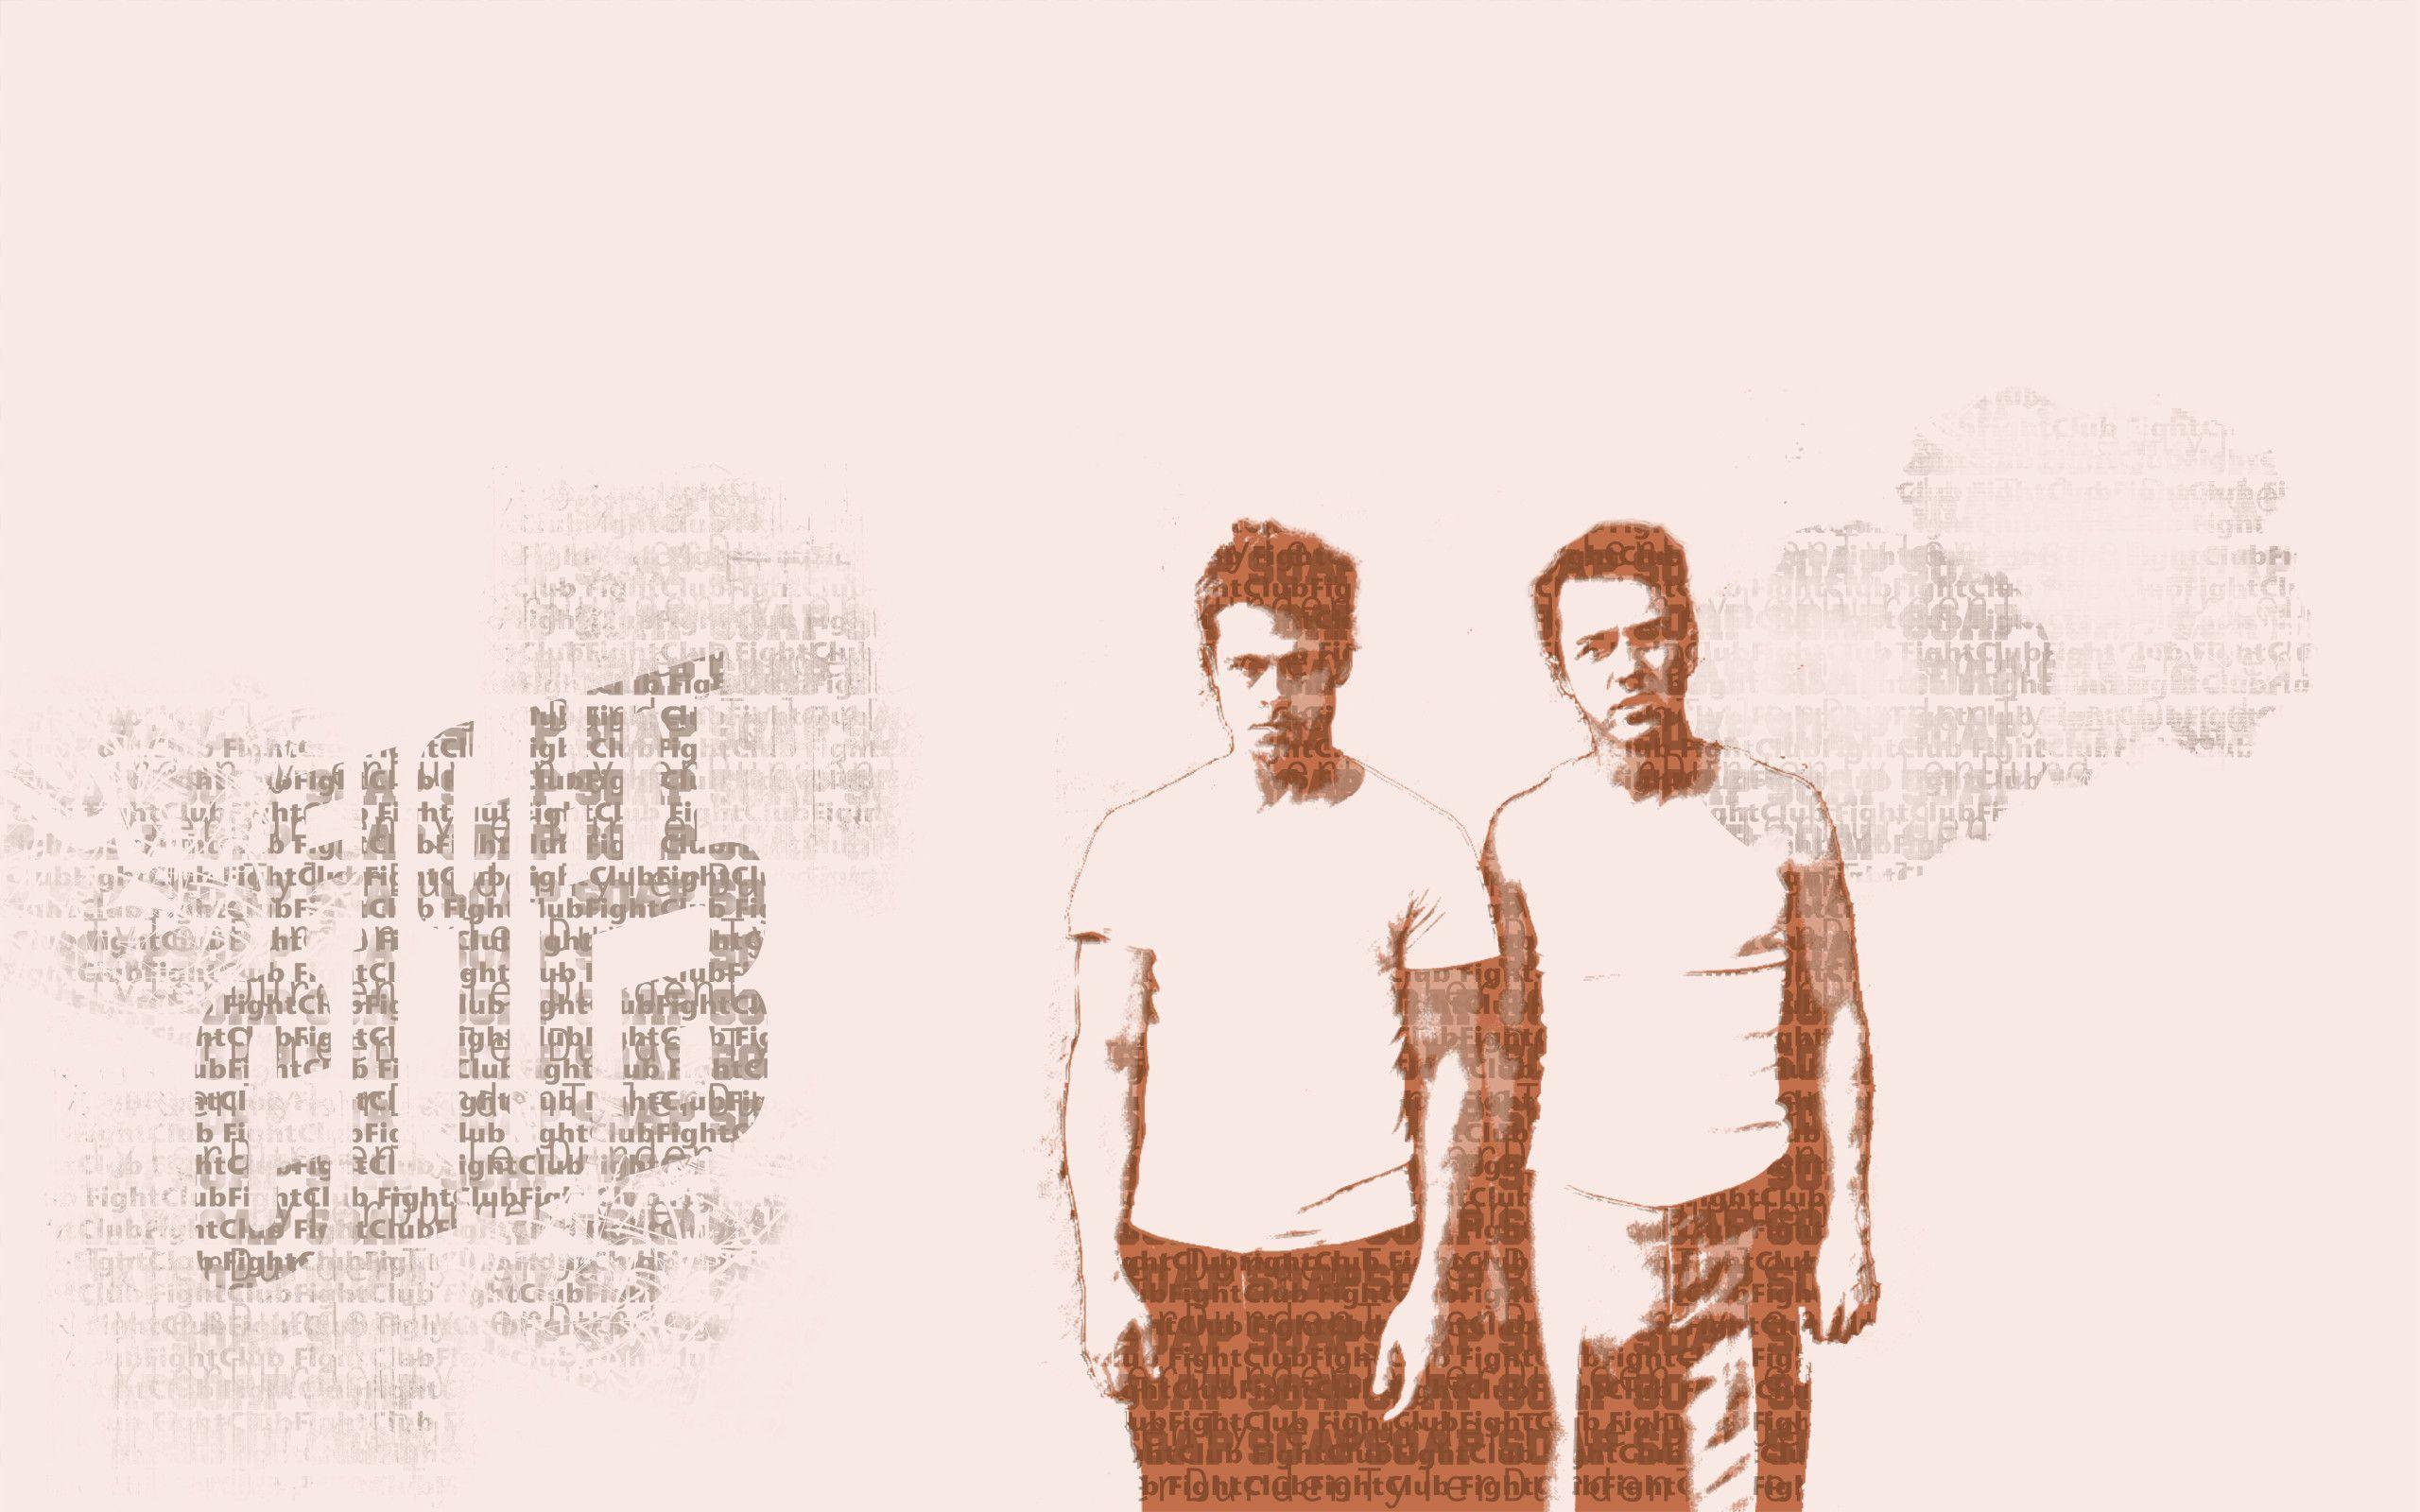 Fight Club Wallpapers - Top 20 Best Fight Club Wallpapers [ HQ ]